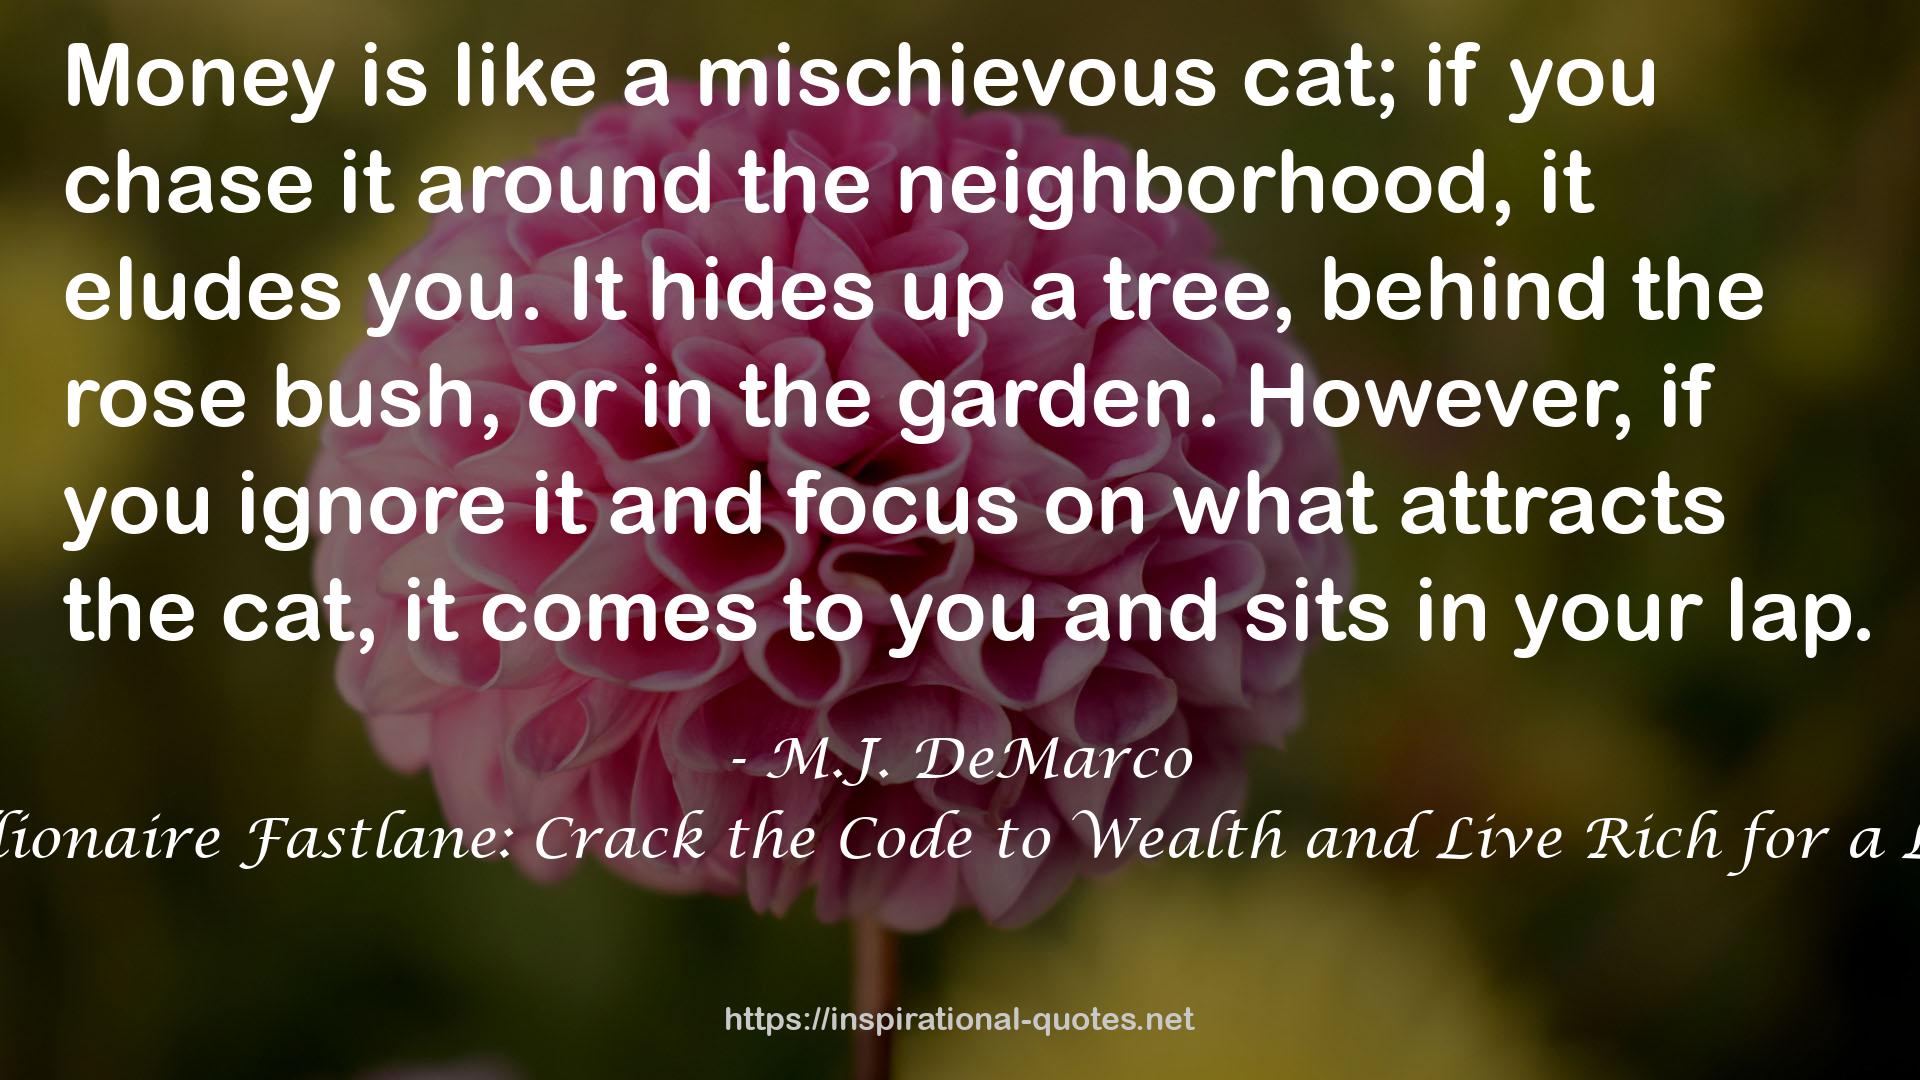 The Millionaire Fastlane: Crack the Code to Wealth and Live Rich for a Lifetime! QUOTES